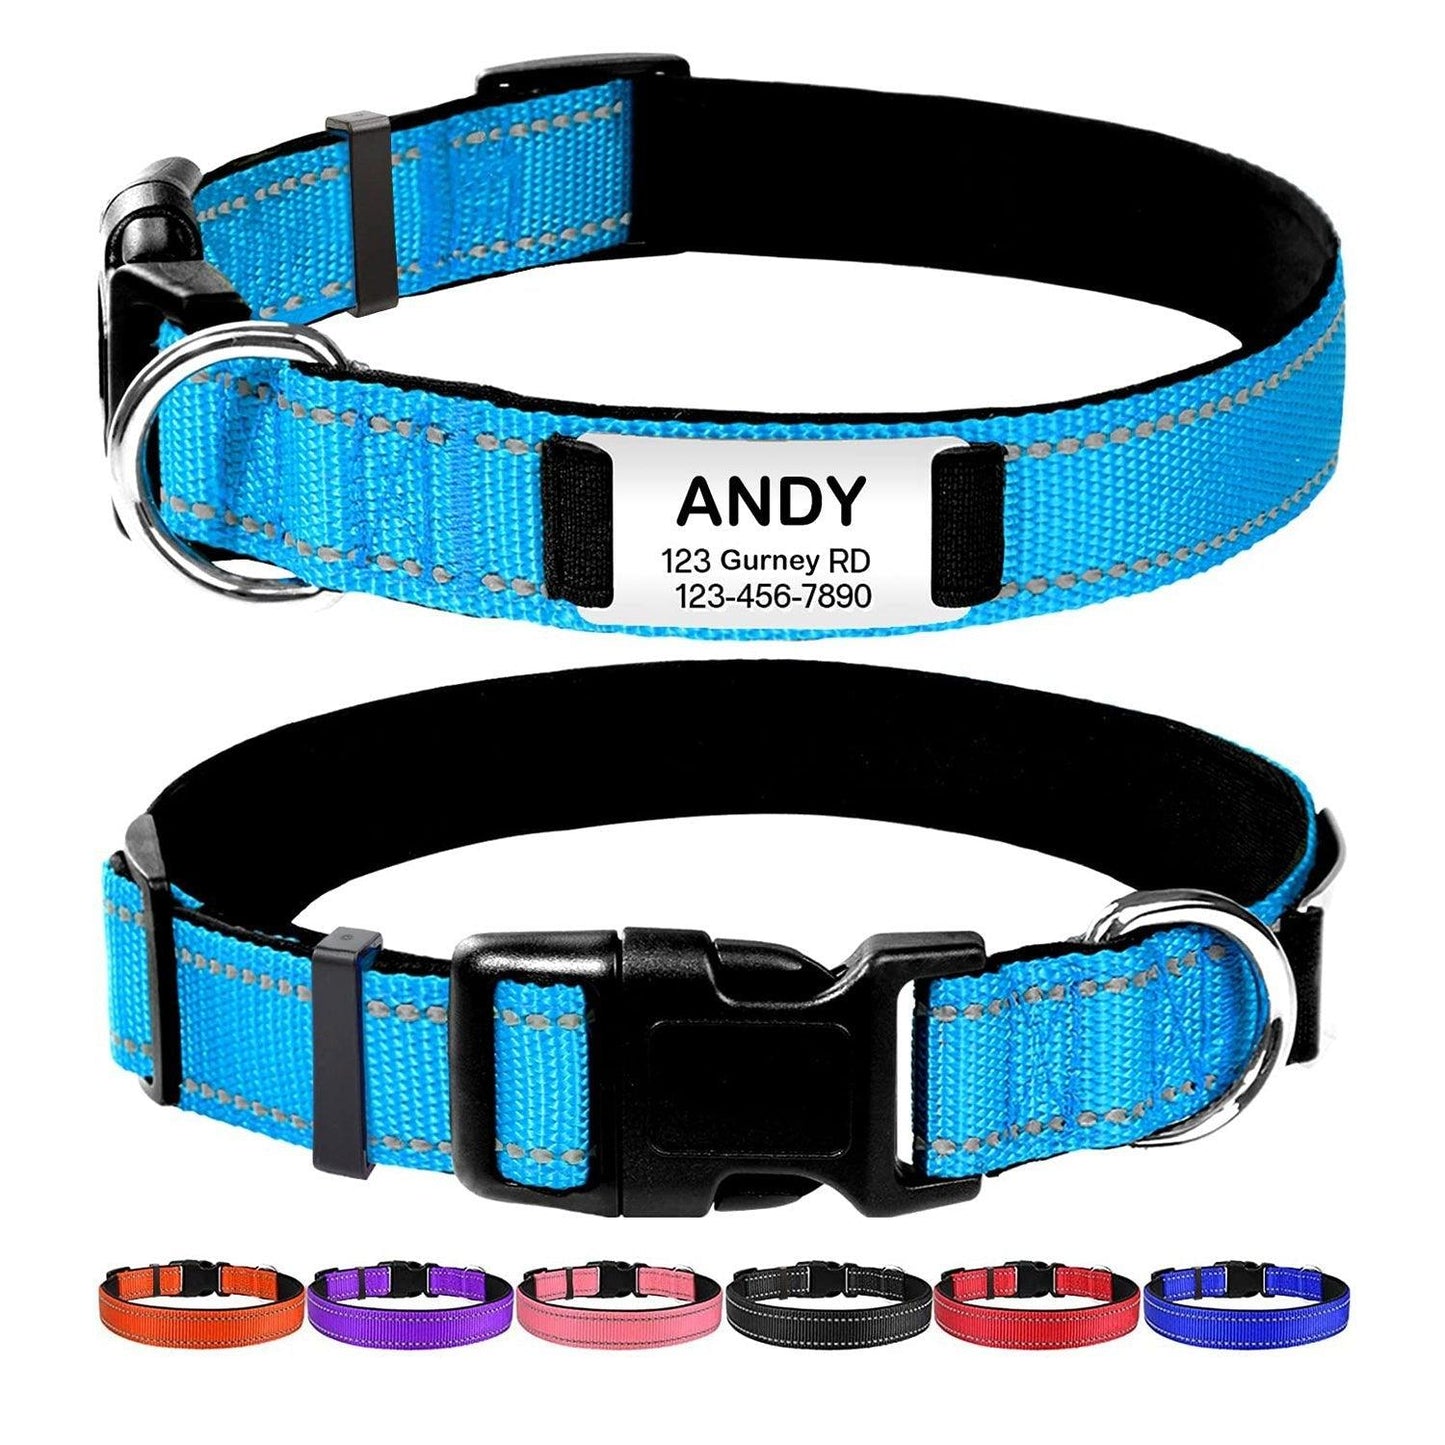 Personalized Dog Collar - Reflective Nylon Dog Collar with Engraved Name Plate - iTalkPet